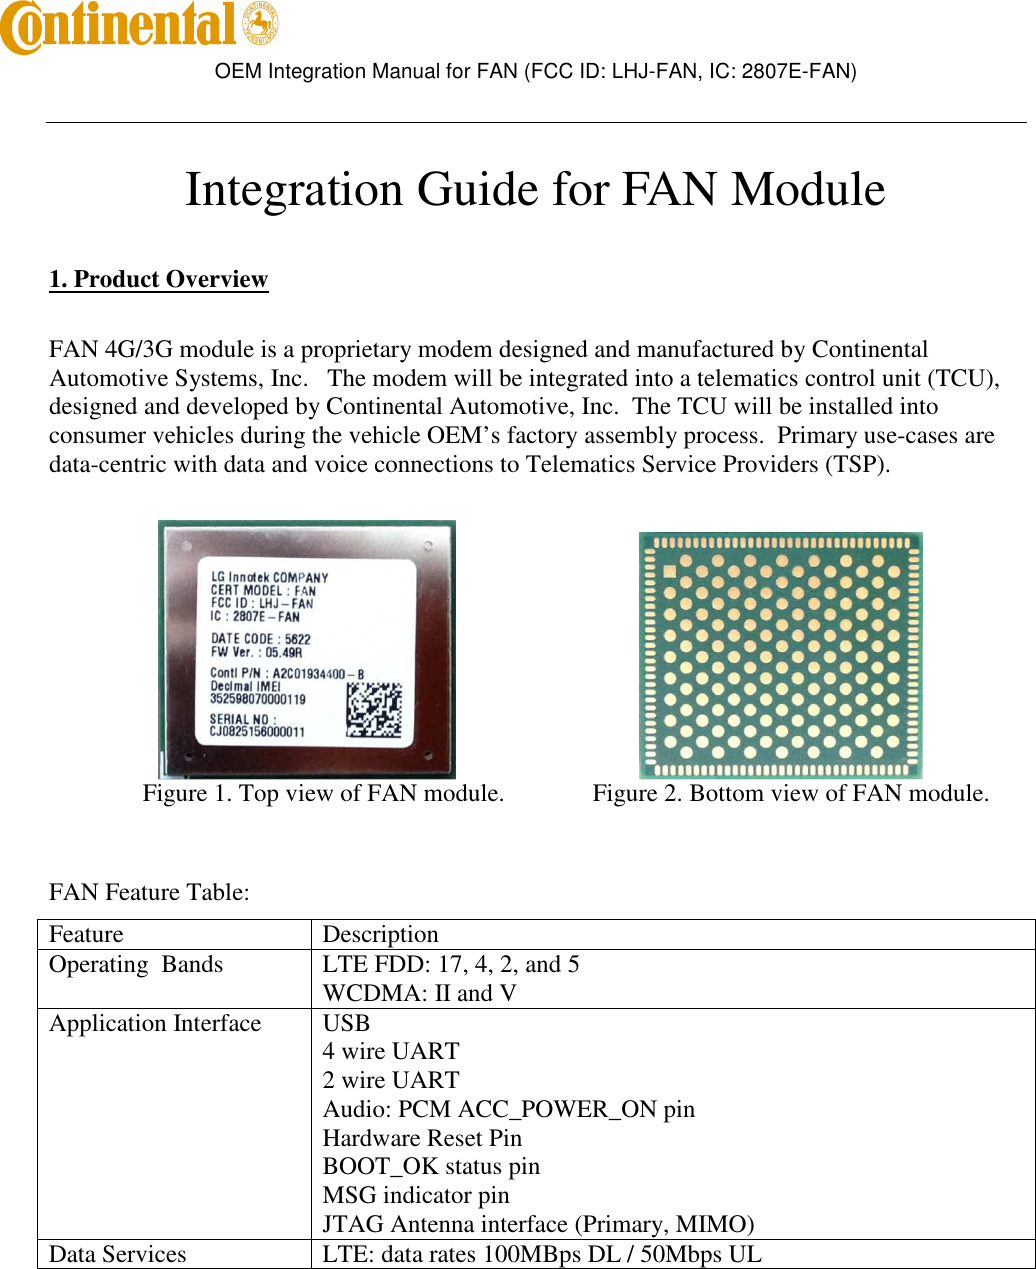        OEM Integration Manual for FAN (FCC ID: LHJ-FAN, IC: 2807E-FAN)    Integration Guide for FAN Module   1. Product Overview  FAN 4G/3G module is a proprietary modem designed and manufactured by Continental Automotive Systems, Inc.   The modem will be integrated into a telematics control unit (TCU), designed and developed by Continental Automotive, Inc.  The TCU will be installed into consumer vehicles during the vehicle OEM’s factory assembly process.  Primary use-cases are data-centric with data and voice connections to Telematics Service Providers (TSP).                                                           Figure 1. Top view of FAN module.     Figure 2. Bottom view of FAN module.   FAN Feature Table: Feature  Description Operating  Bands  LTE FDD: 17, 4, 2, and 5 WCDMA: II and V Application Interface  USB 4 wire UART 2 wire UART Audio: PCM ACC_POWER_ON pin Hardware Reset Pin BOOT_OK status pin MSG indicator pin JTAG Antenna interface (Primary, MIMO) Data Services  LTE: data rates 100MBps DL / 50Mbps UL   